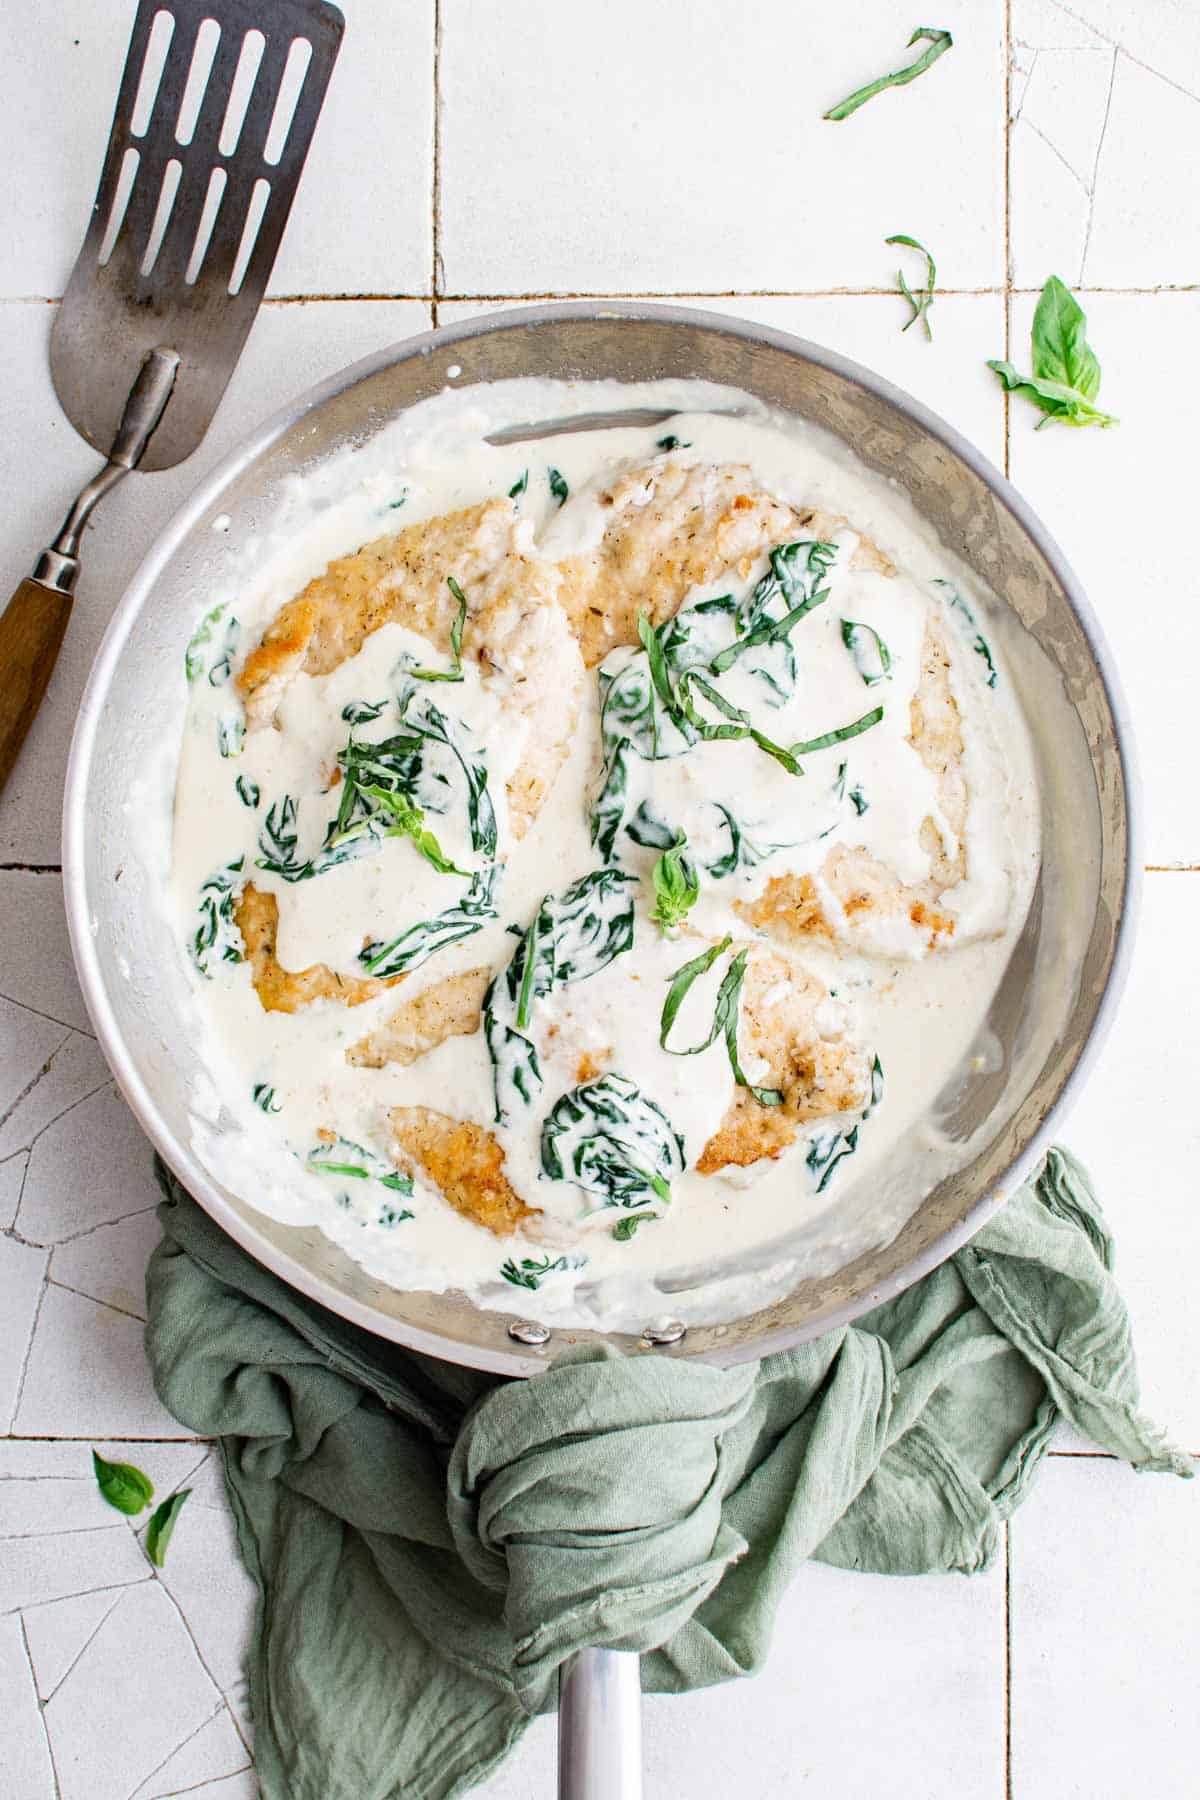 Creamy Chicken Florentine is a one-pot meal that’s great for weeknight dinner, date nights, or all sorts of special occasions. Lightly breaded chicken is pan-seared and cooked with a delectable white wine sauce loaded with parmesan cheese, garlic, and fresh spinach. Learn how to make chicken florentine and take your dinners from boring to exciting in less than 45 minutes. Click through to get this awesome chicken florentine recipe!! #chickenflorentine #onepot #fancychicken #easychickenrecipes"